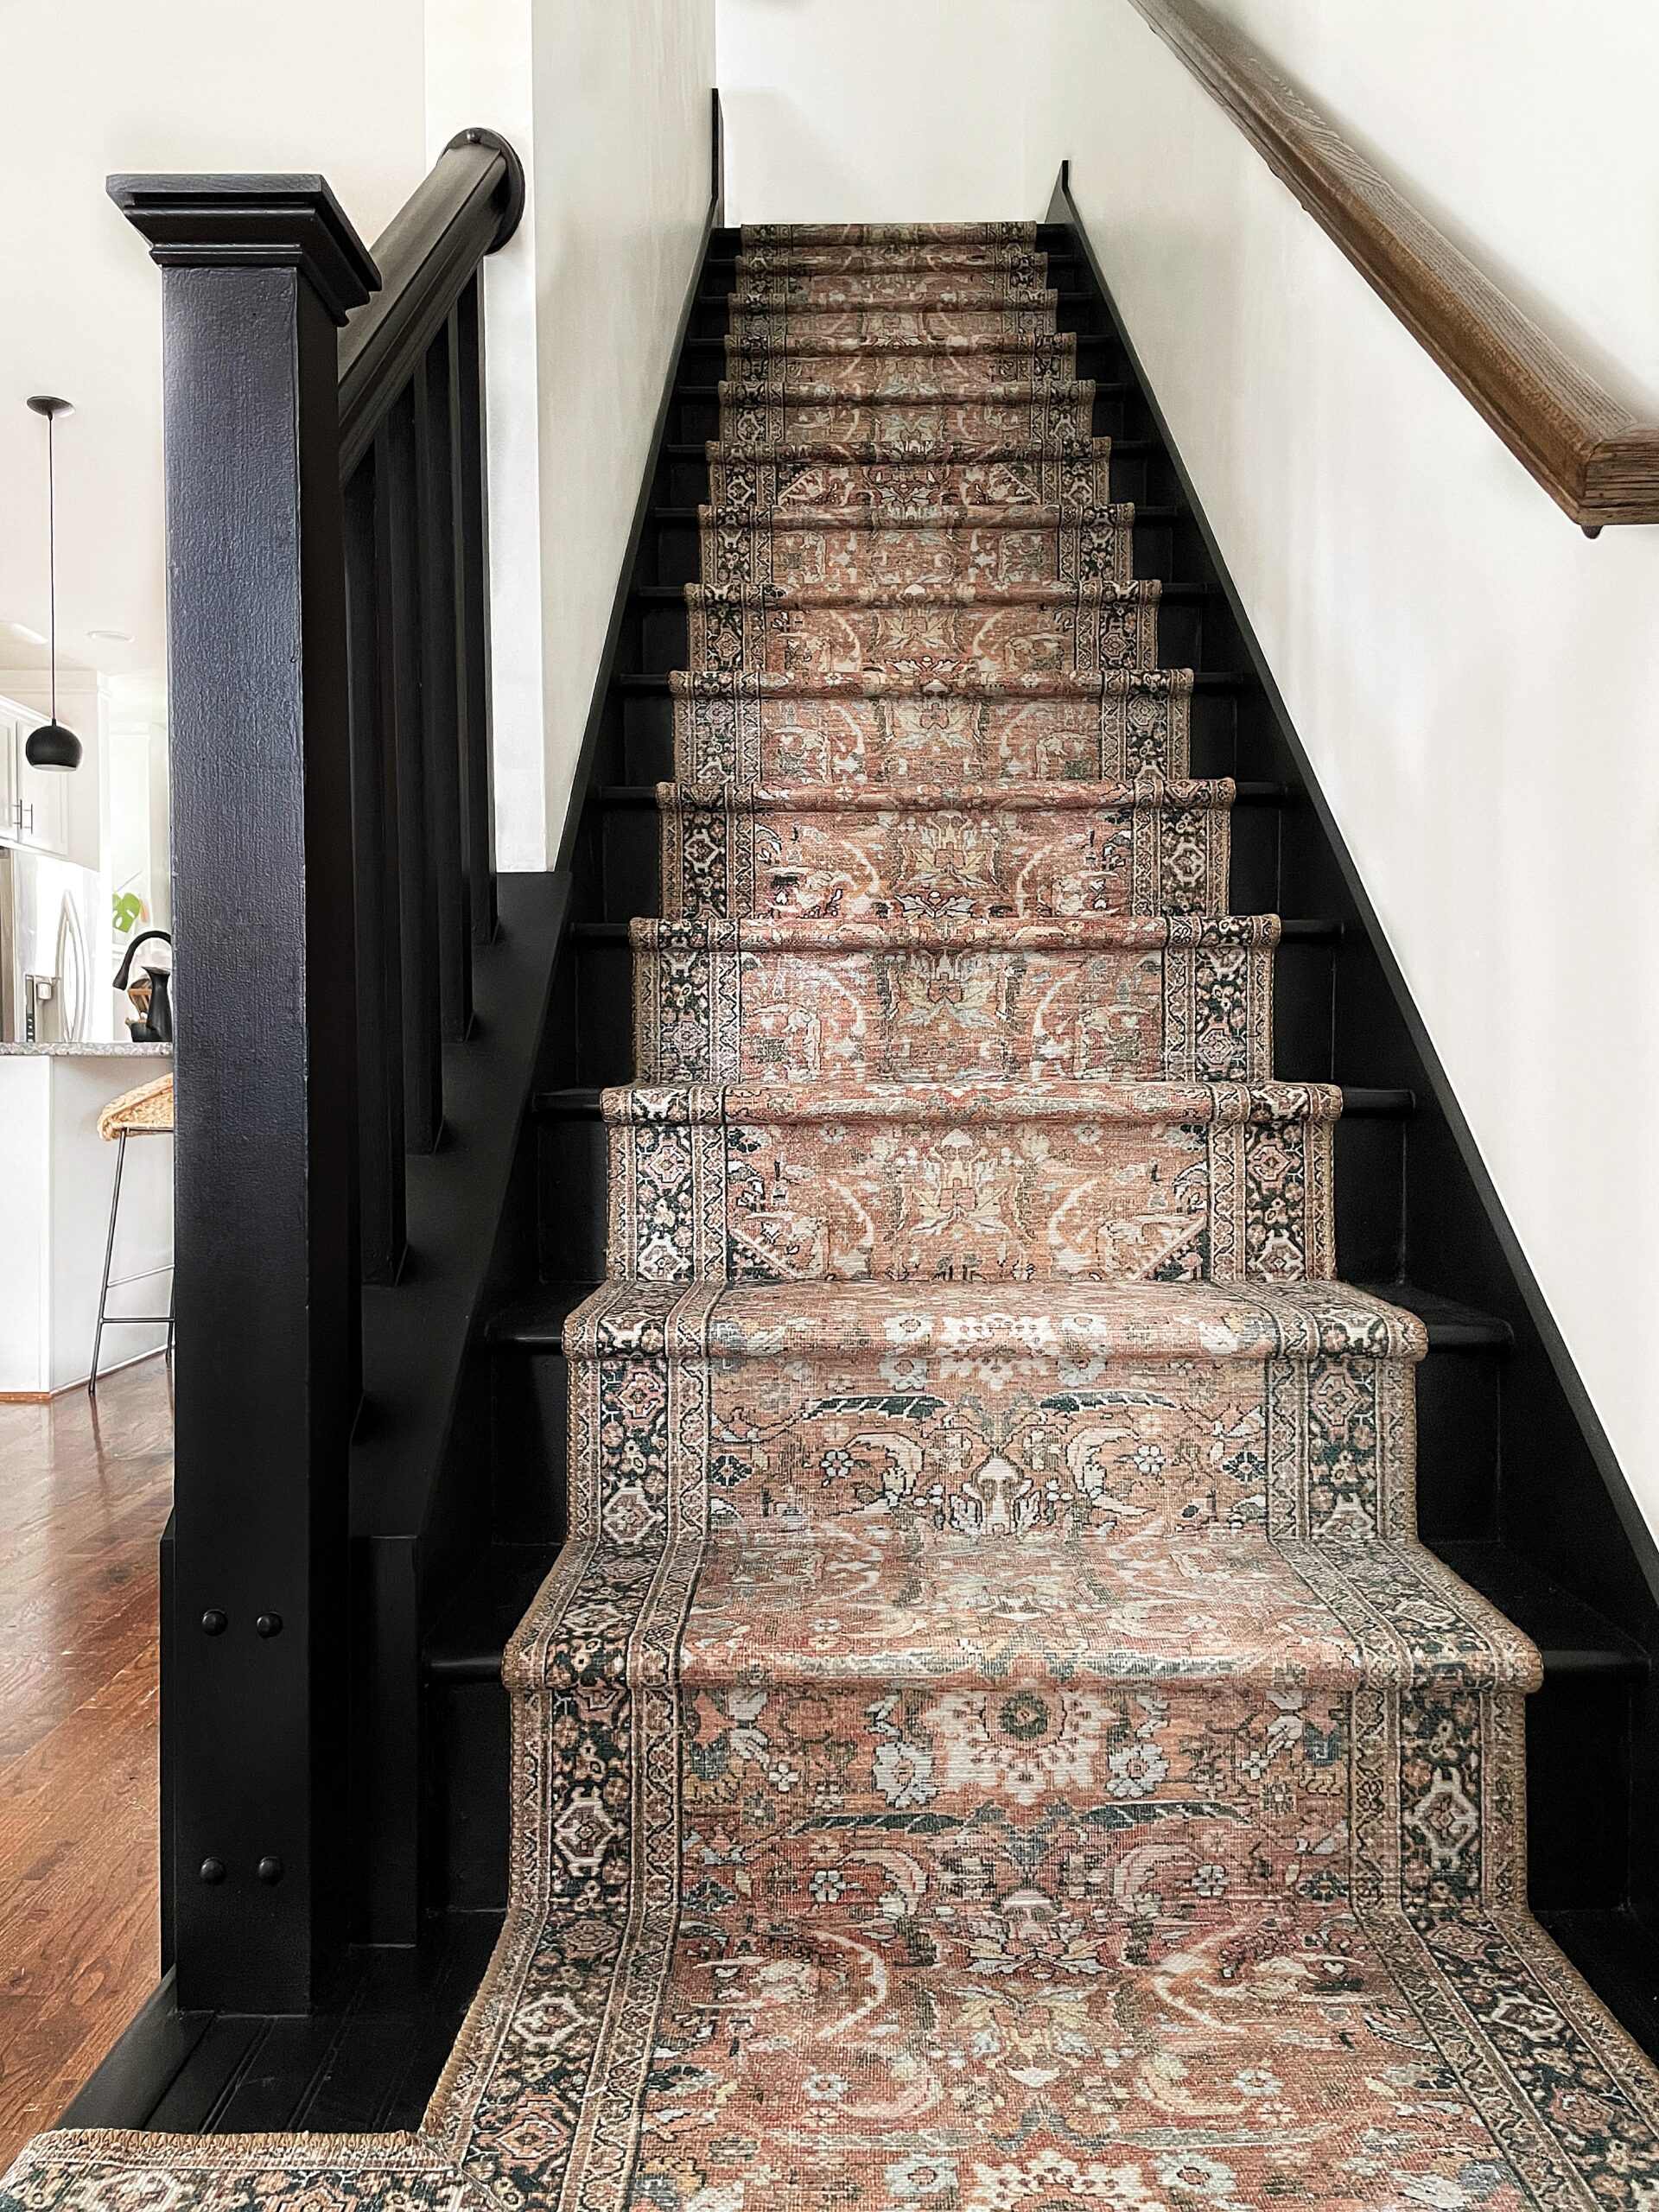 How to Install a Stair Runner (Step-by-Step Tutorial)